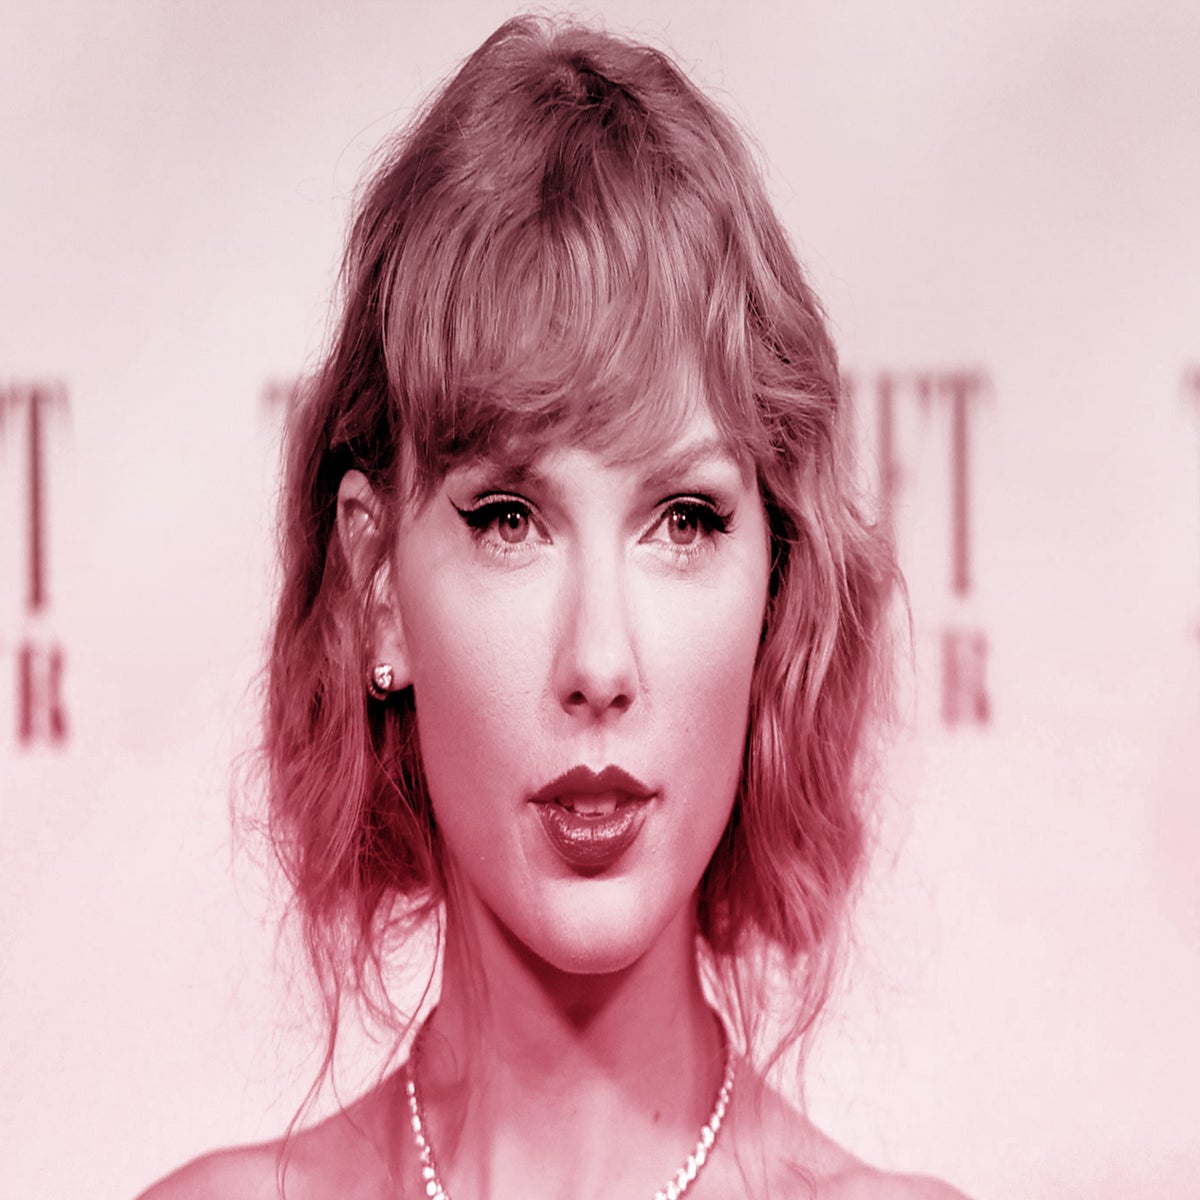 Hero of her own story': Taylor Swift named Time magazine's Person